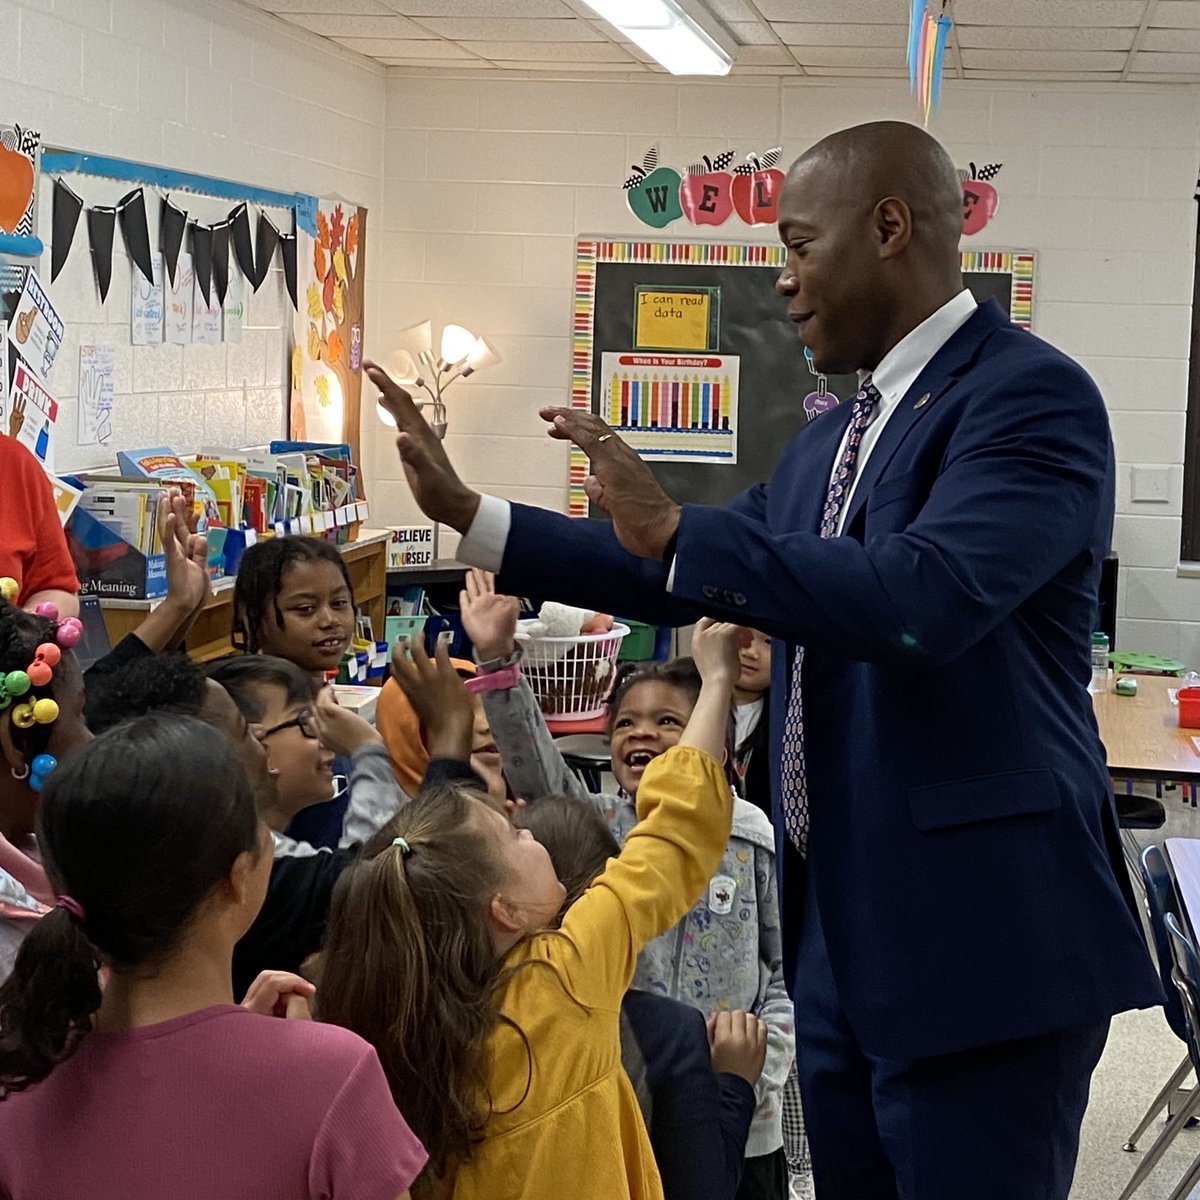 Our public schools set me on a path to be where I am today. That’s why it’s disheartening to see Gov. Youngkin’s amendments slash funding for K-12 public schools by close to $200 million for our highest-need schools. We need to invest in every student, regardless of zip code.